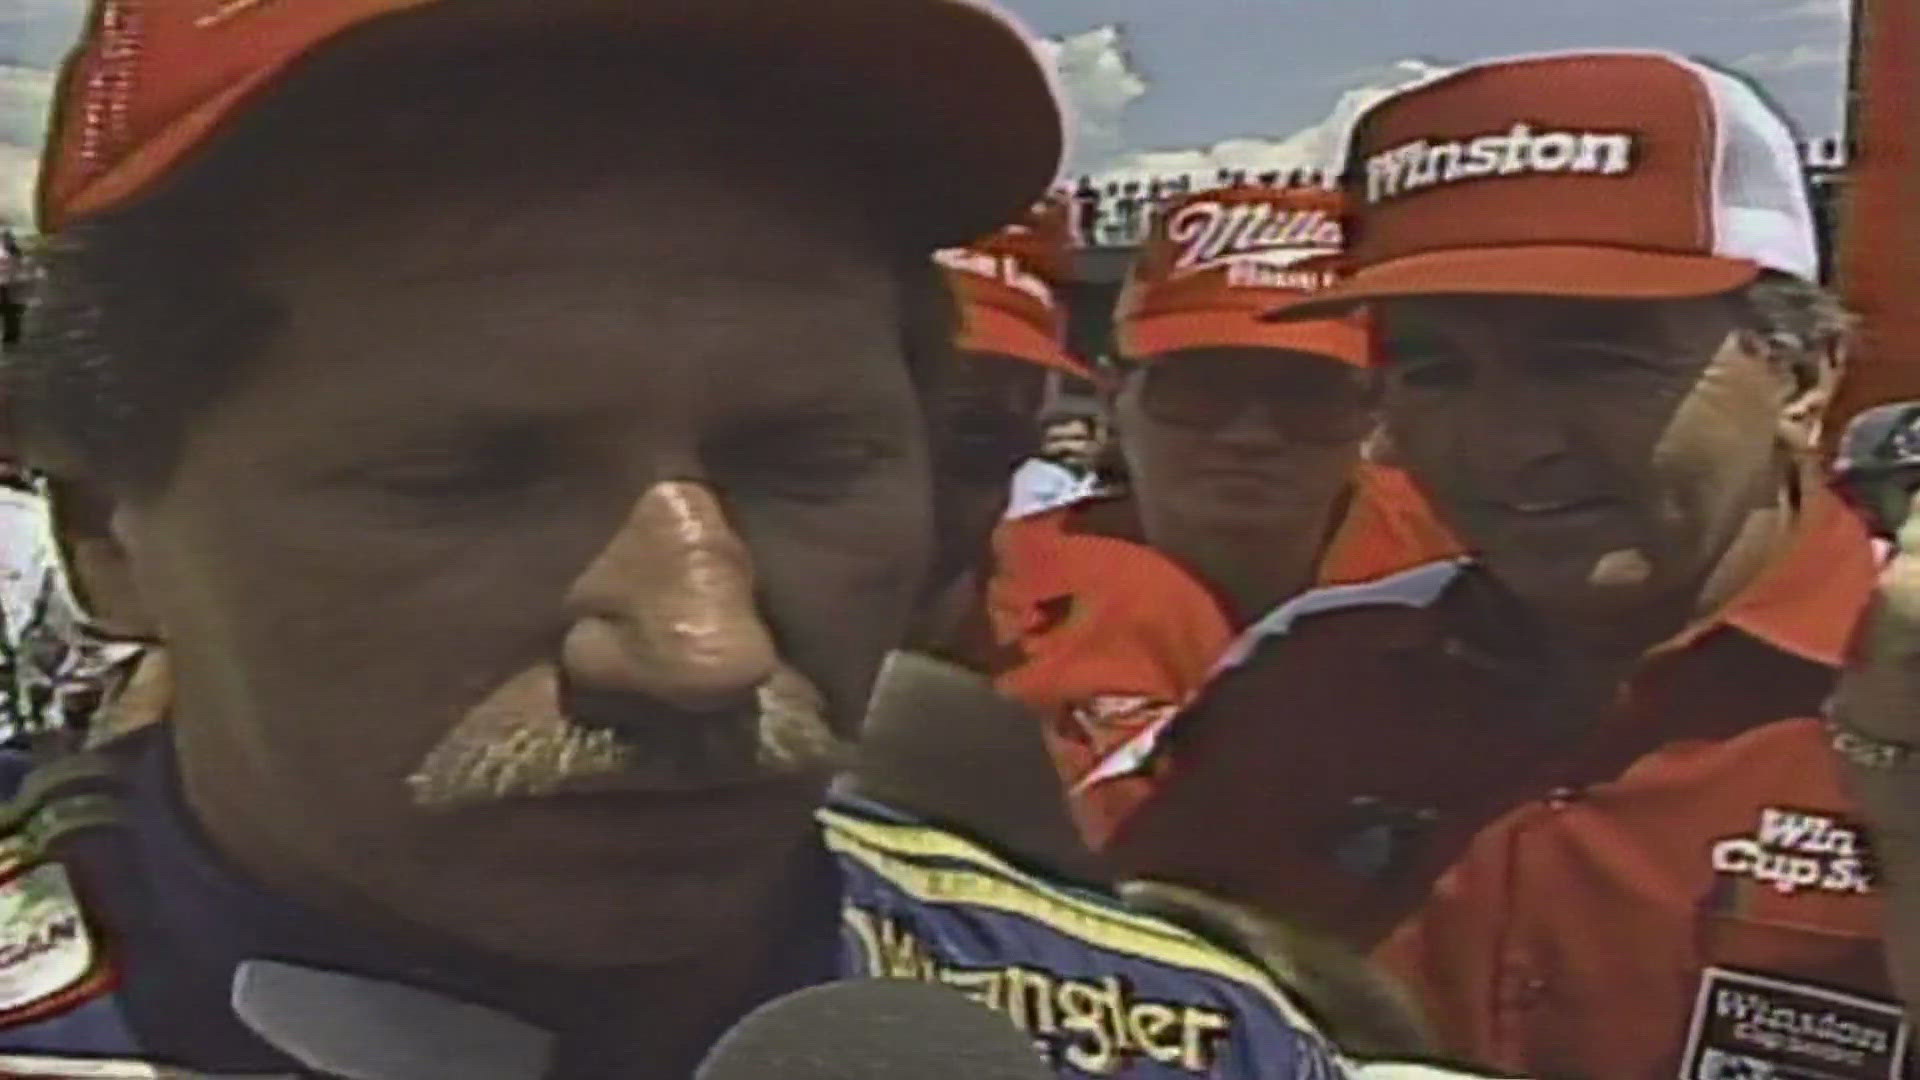 This was Earnhardt's 7th win of the 1987 season